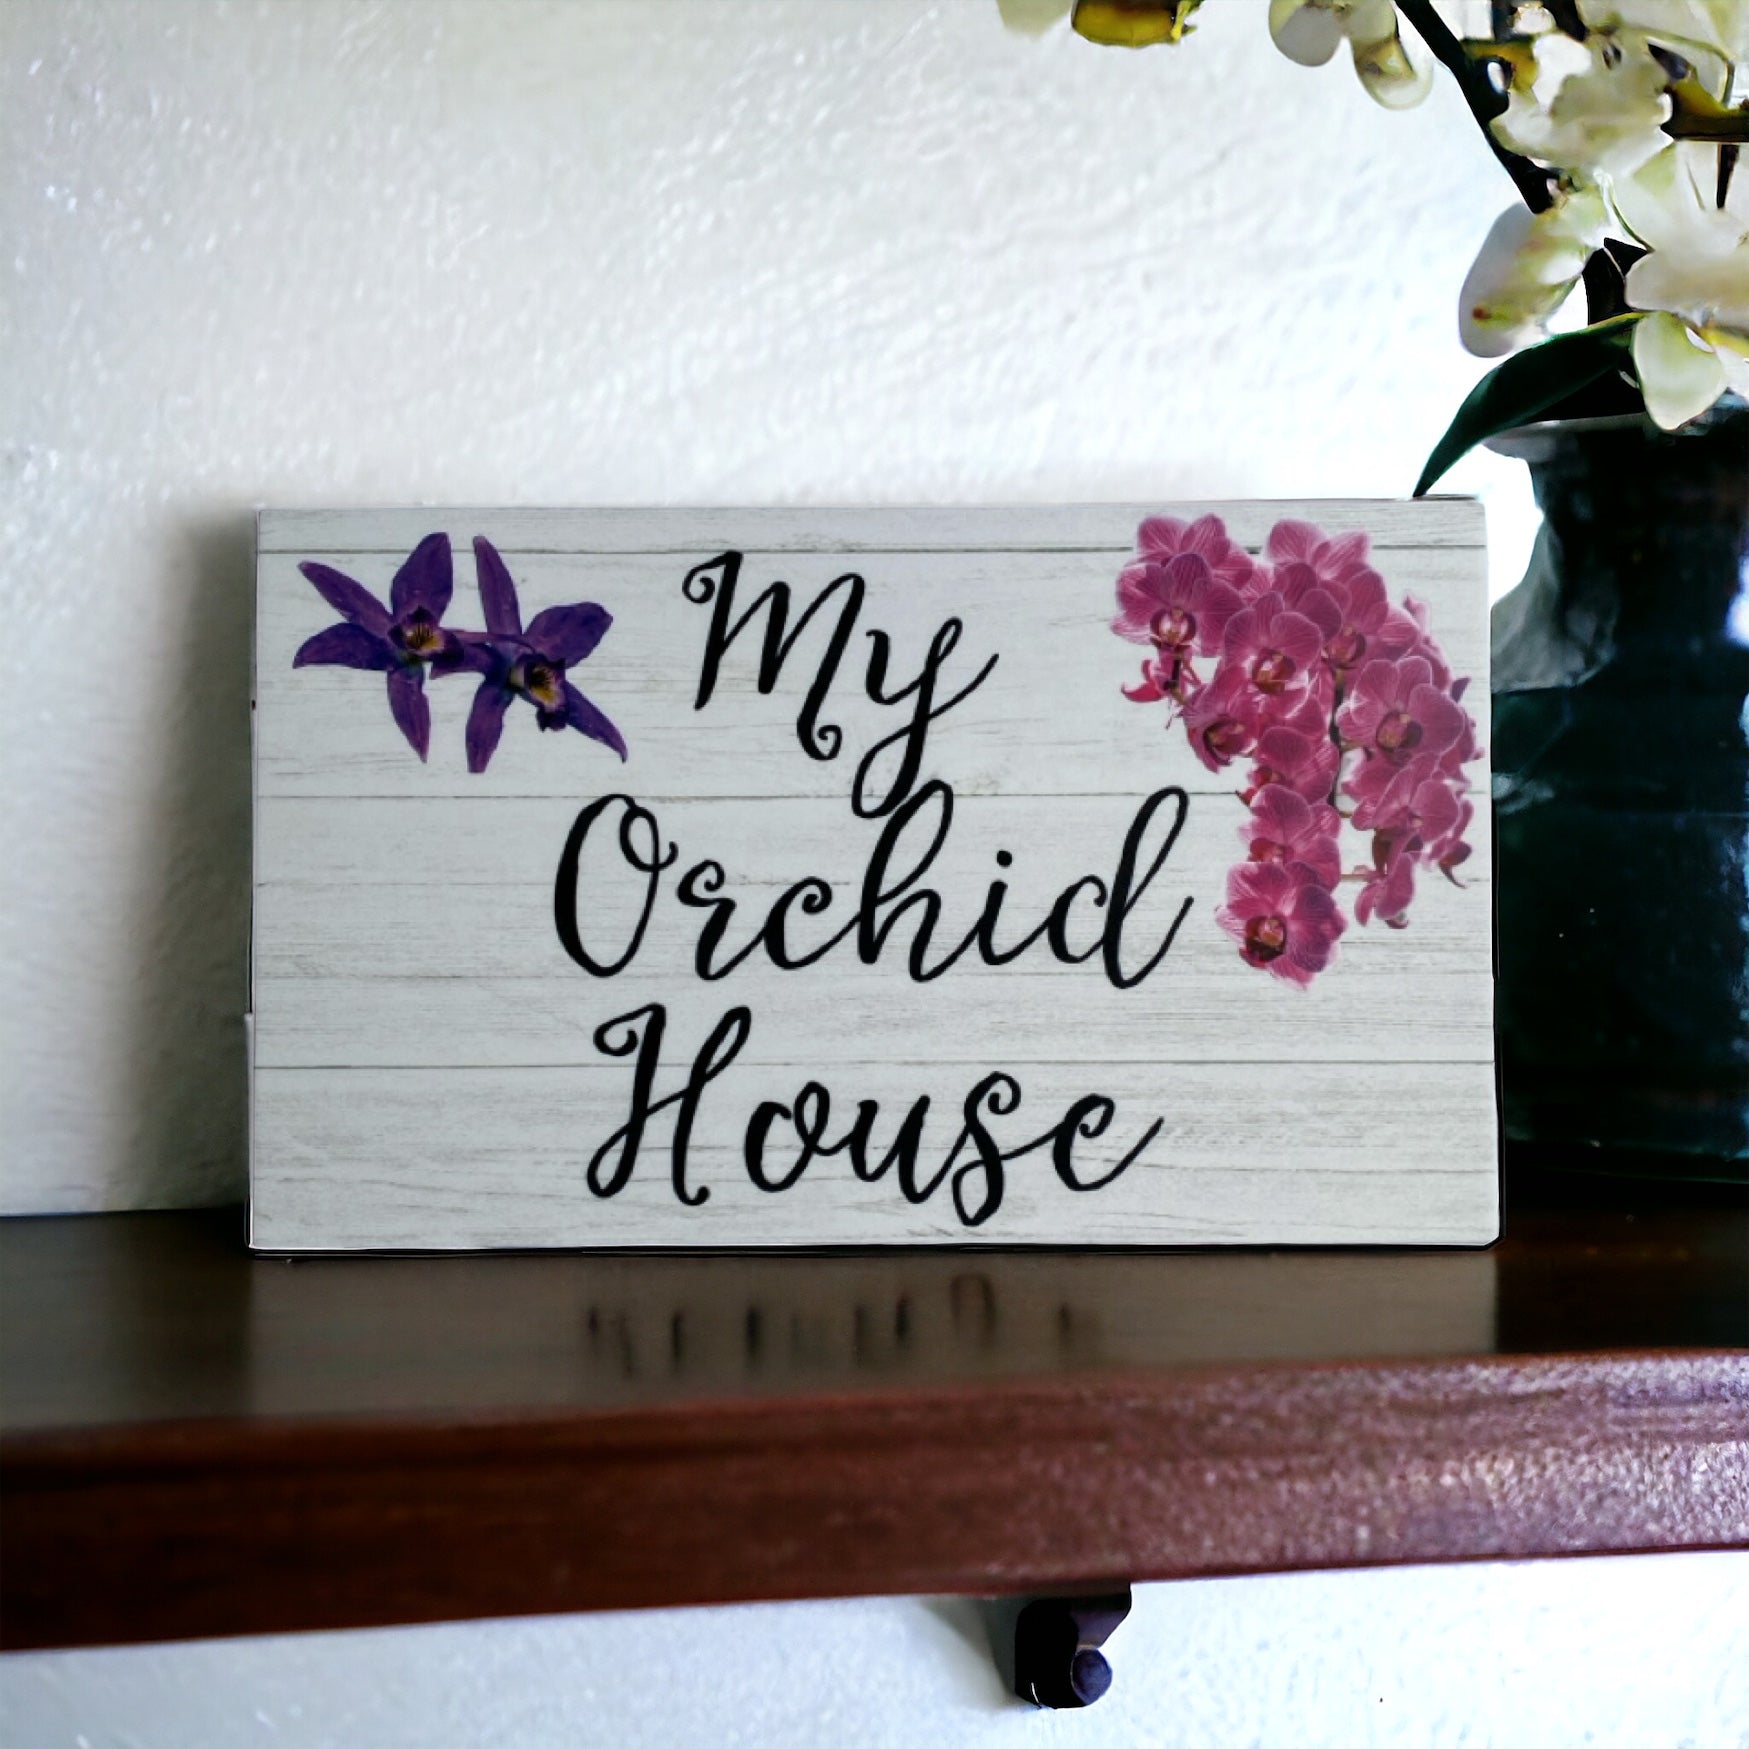 Orchid House Custom Personalised Sign - The Renmy Store Homewares & Gifts 